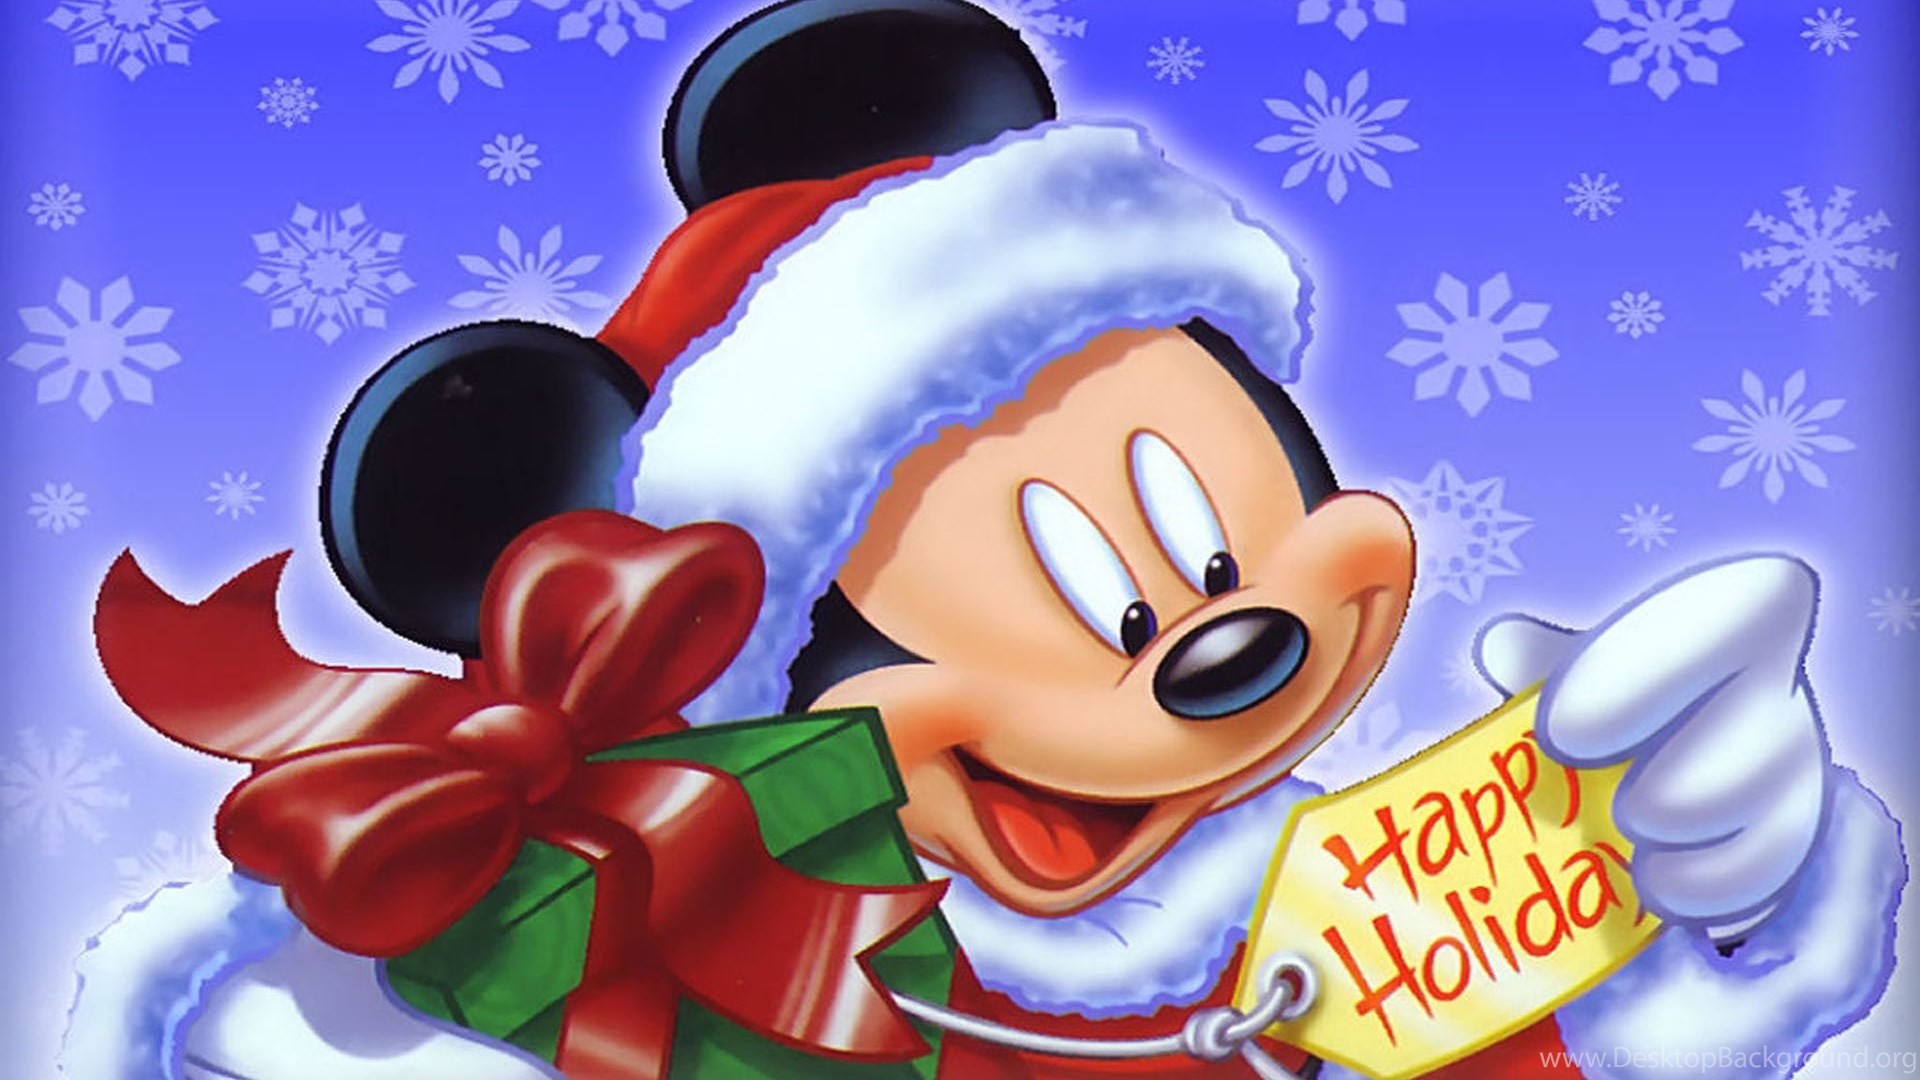 Disney Christmas Background (47+ pictures)